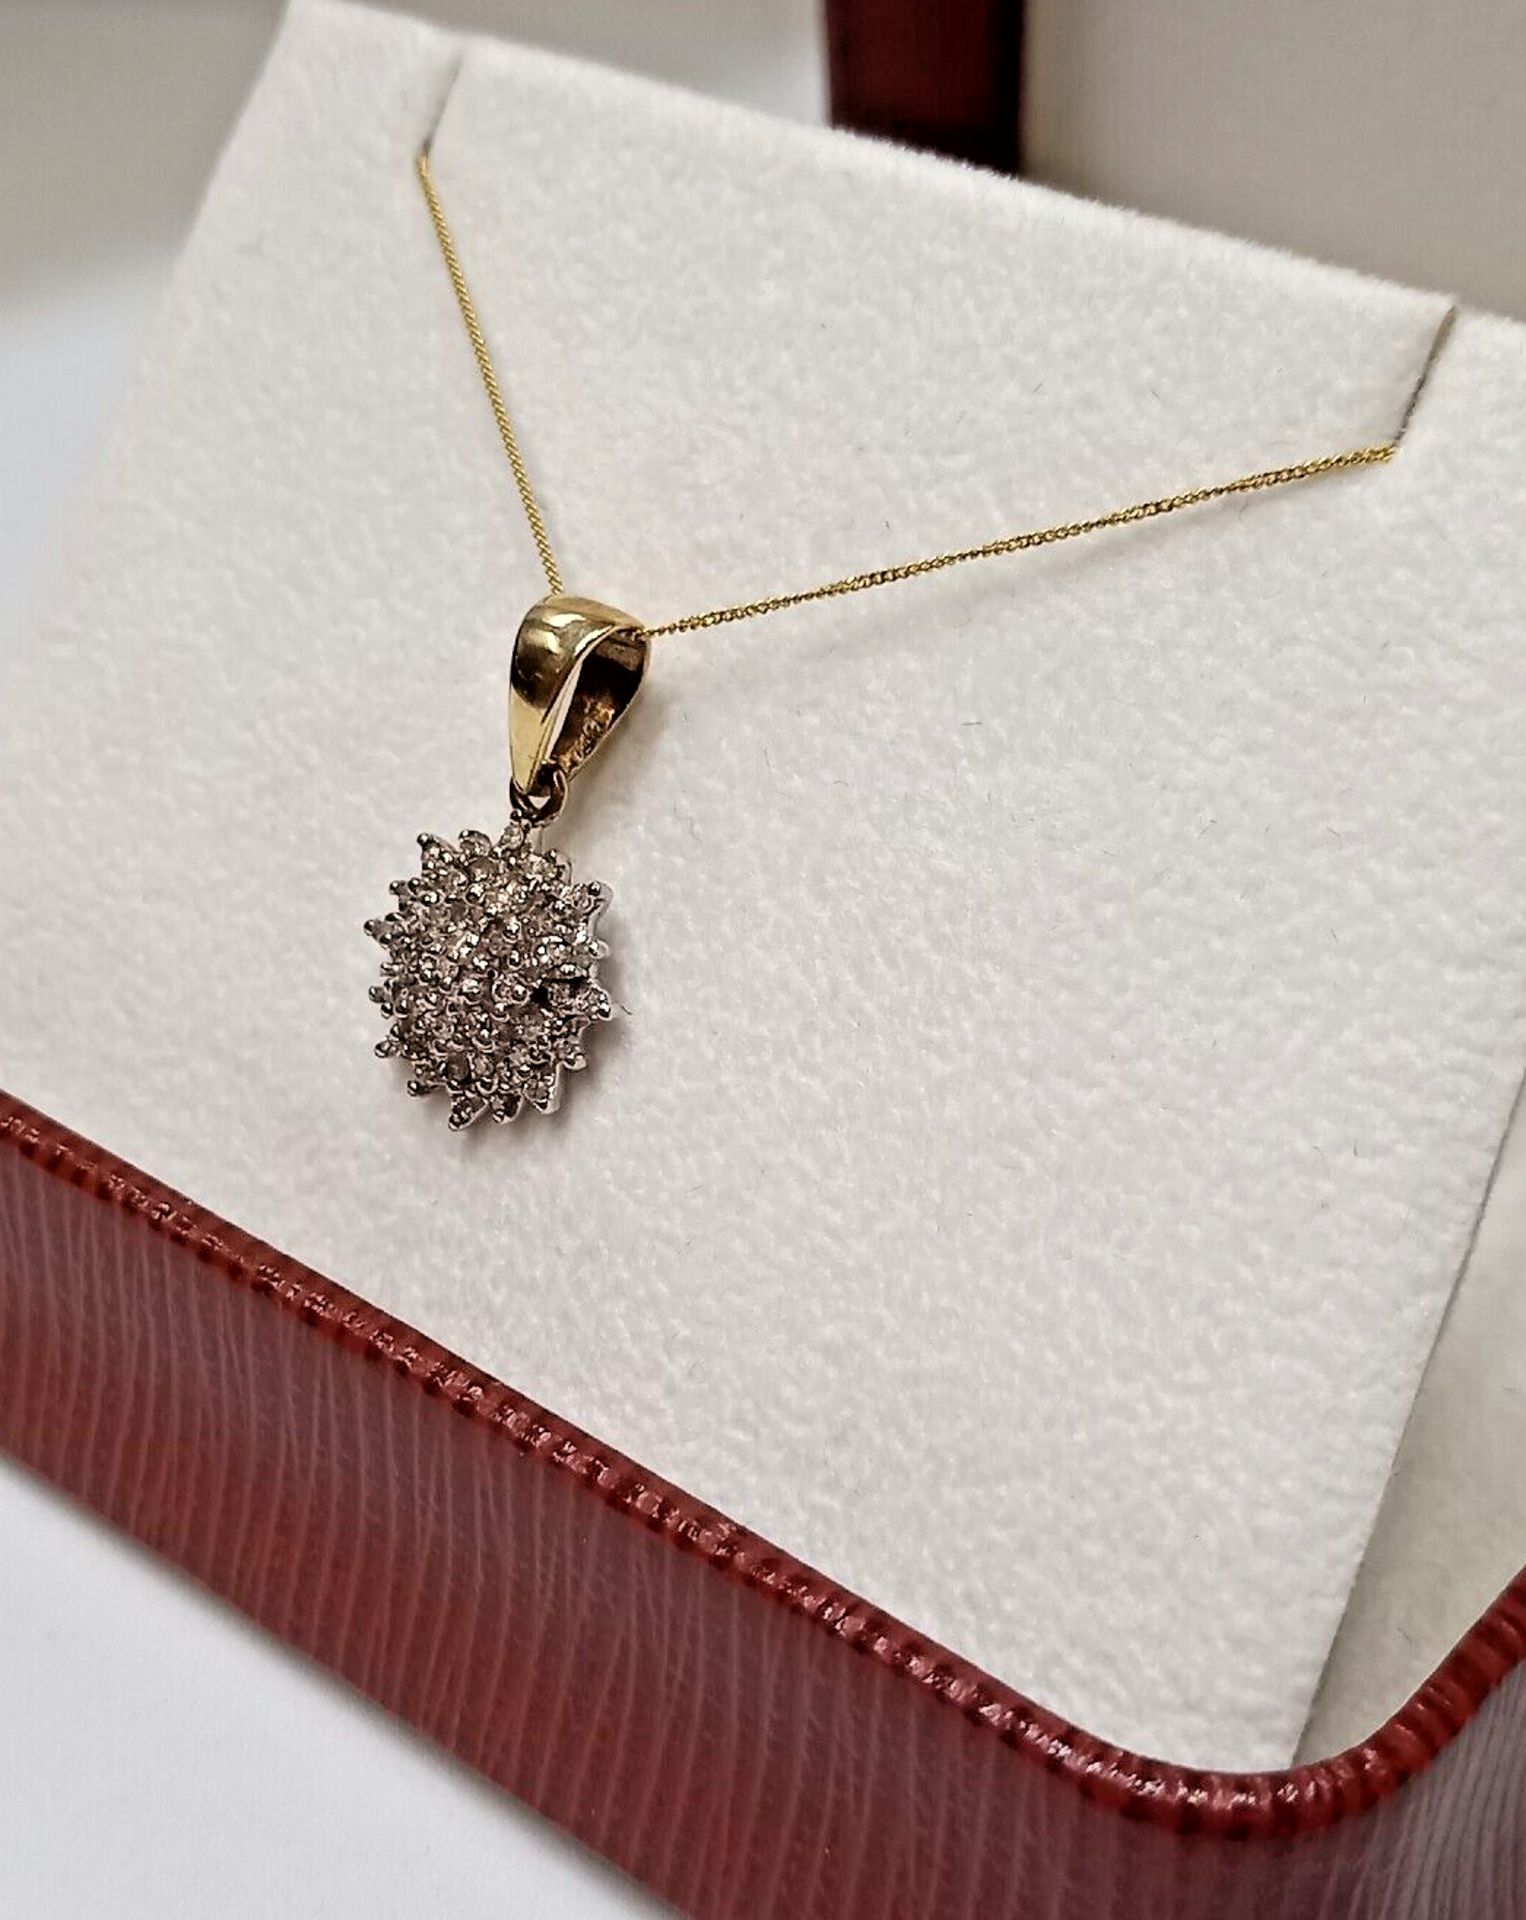 0.35CT CLUSTER DIAMOND PENDANT/9CT YELLOW GOLD IN GIFT BOX WITH VALUATION CERTIFICATE OF £1095 - Image 3 of 3